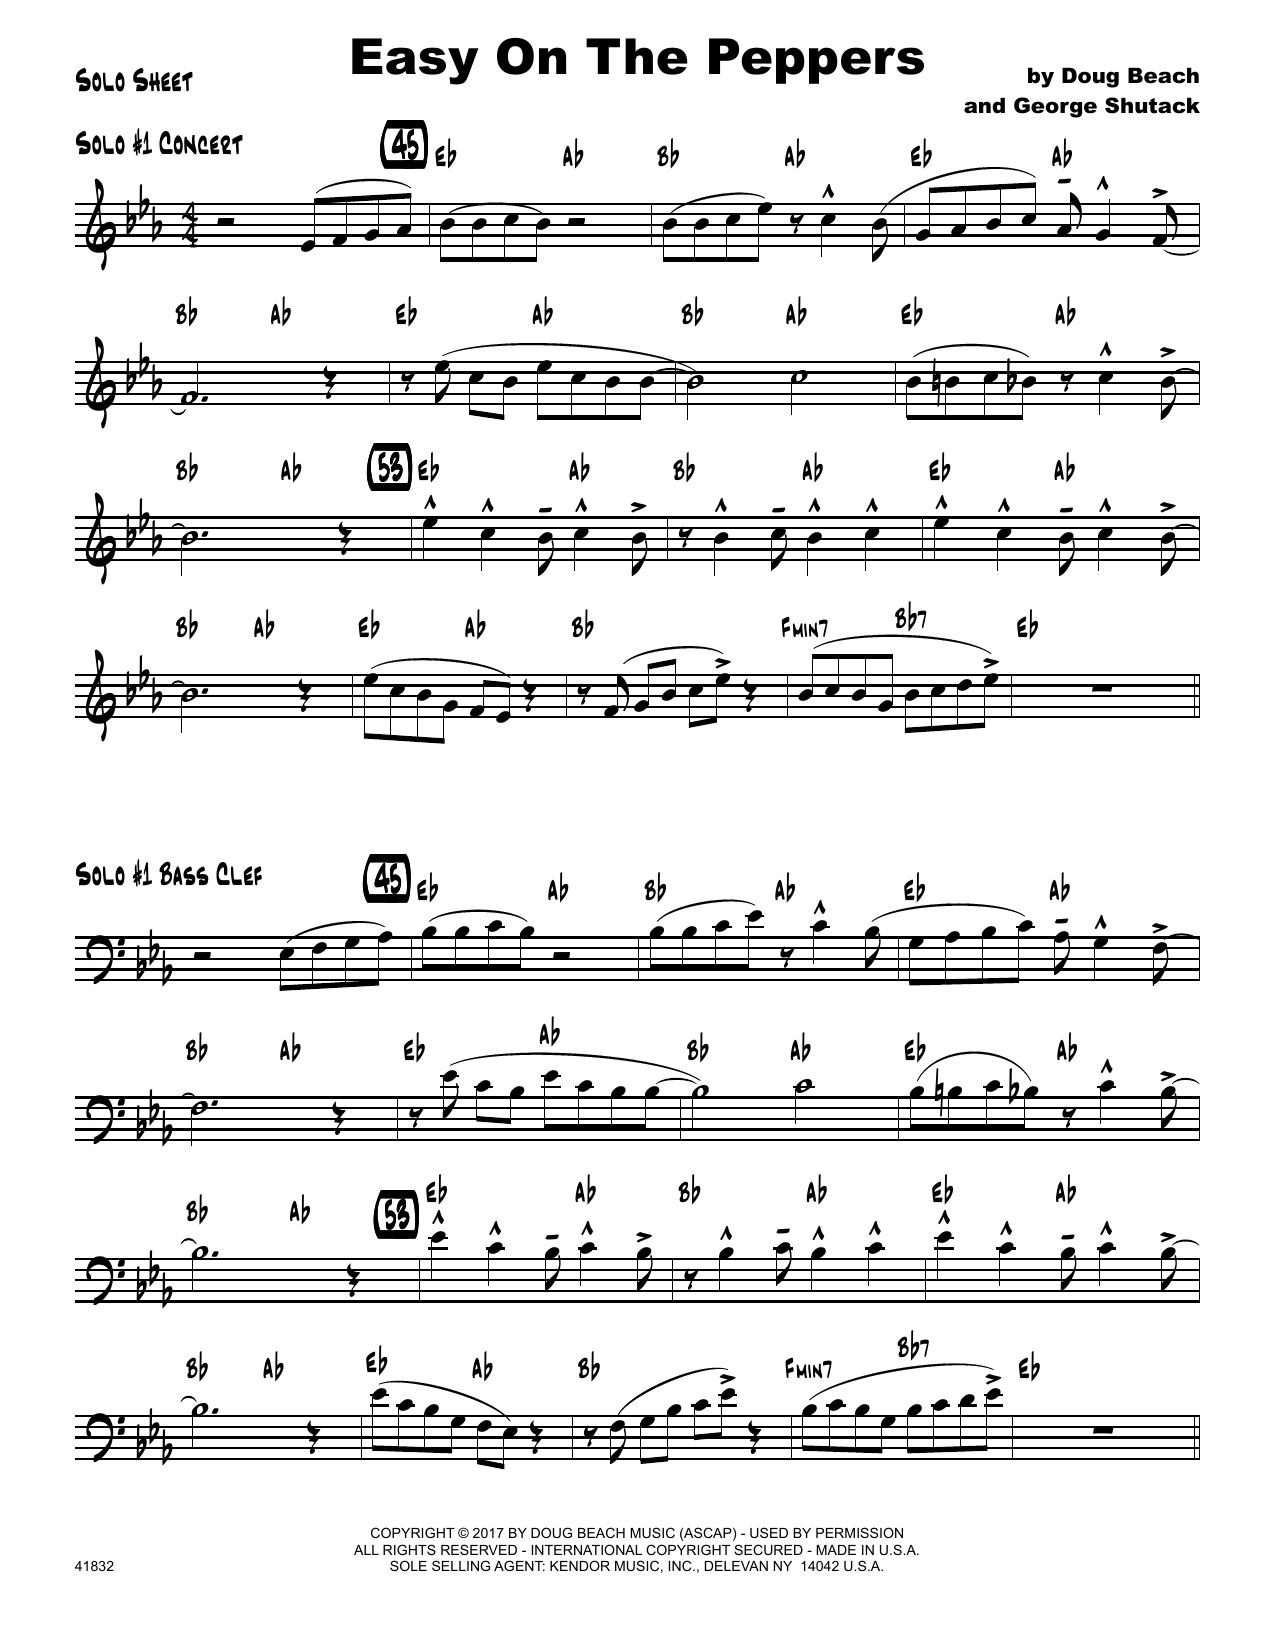 Download Doug Beach & George Shutack Easy On The Peppers - Solo Sheet Sheet Music